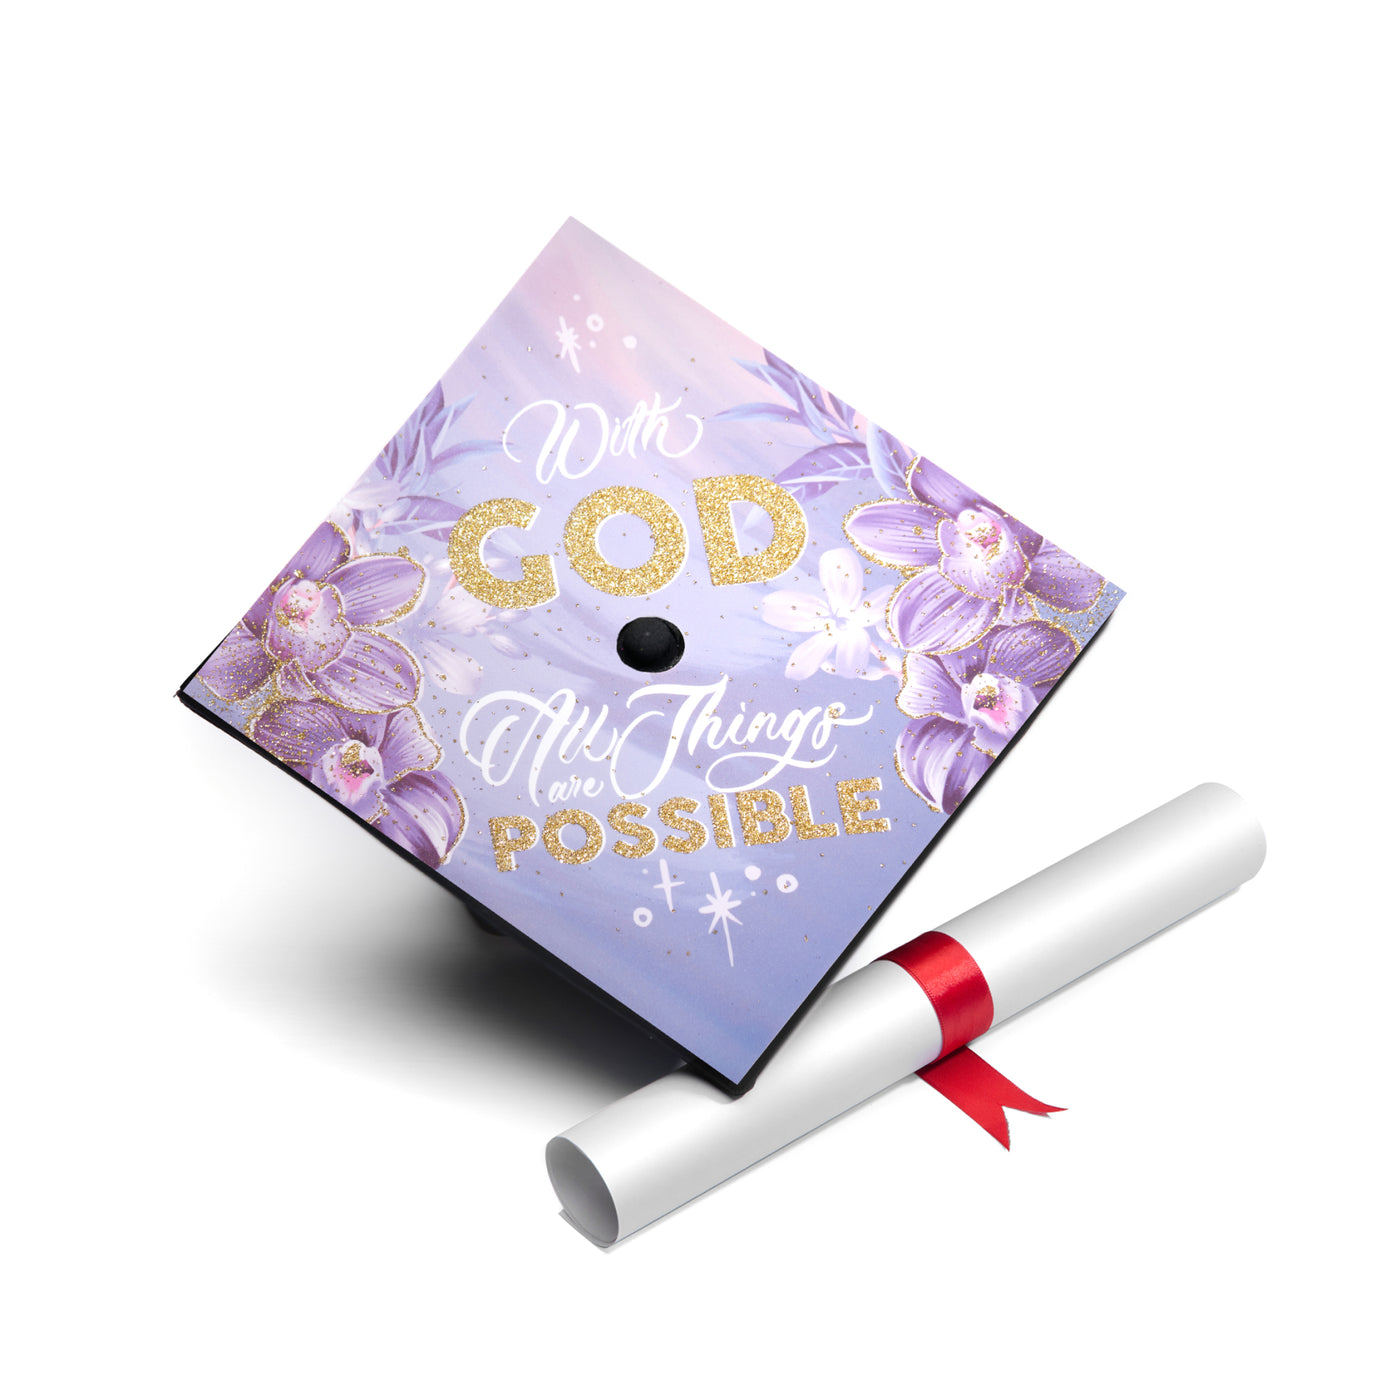 Graduation cap topper art print, With god all things are possible